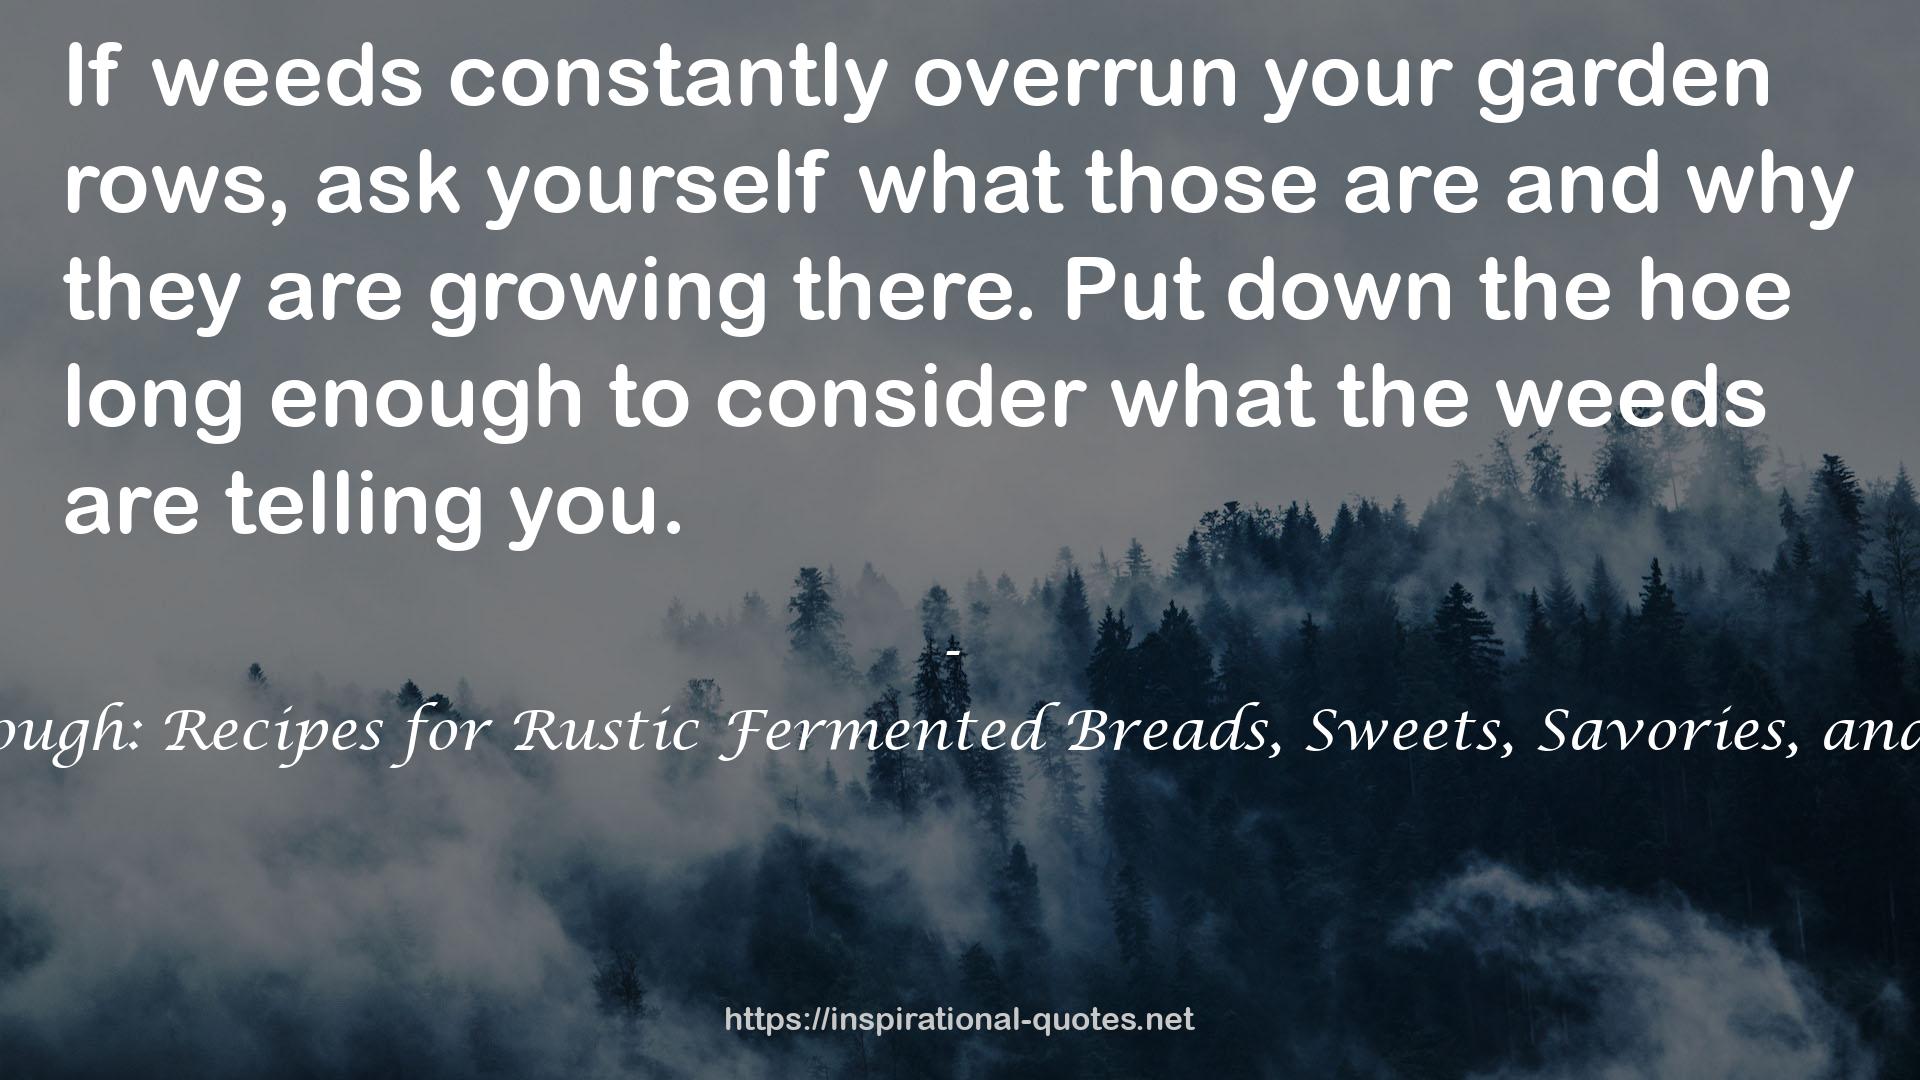 Sourdough: Recipes for Rustic Fermented Breads, Sweets, Savories, and More QUOTES